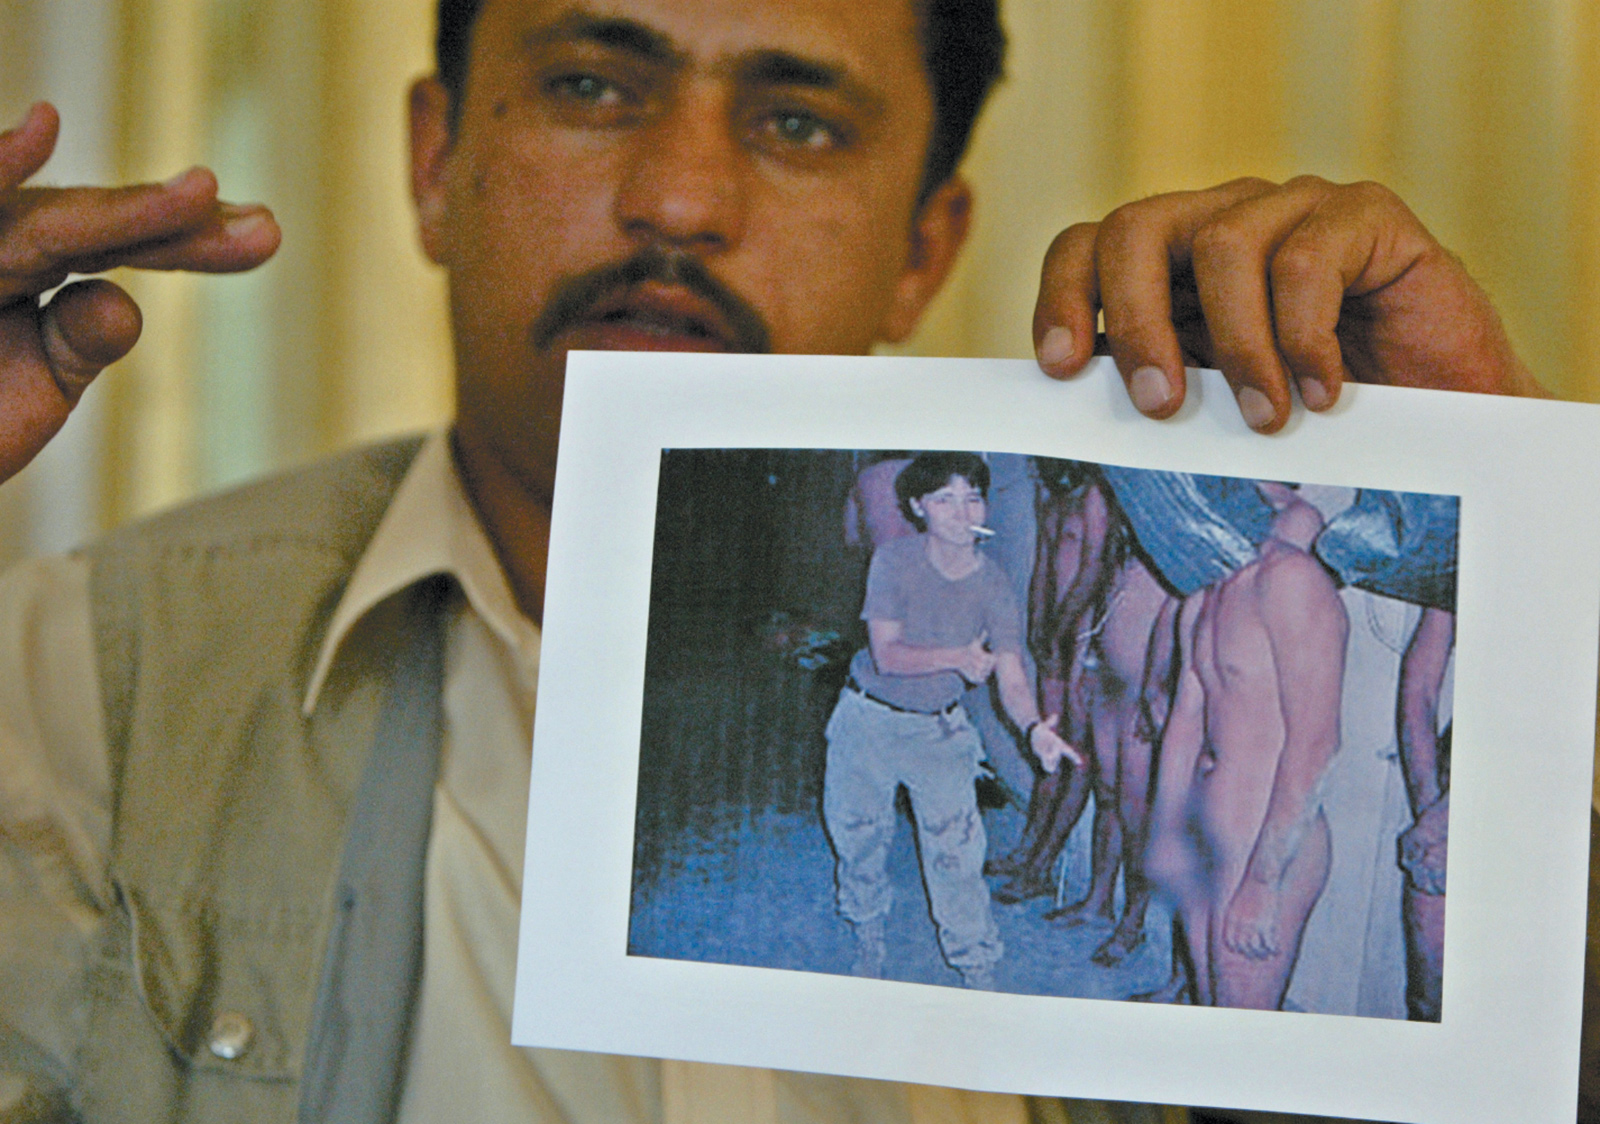 Saddam Saleh, a former prisoner at Abu Ghraib, showing a photograph of himself and other prisoners being abused there in November 2003 by US soldiers, Baghdad, May 2004